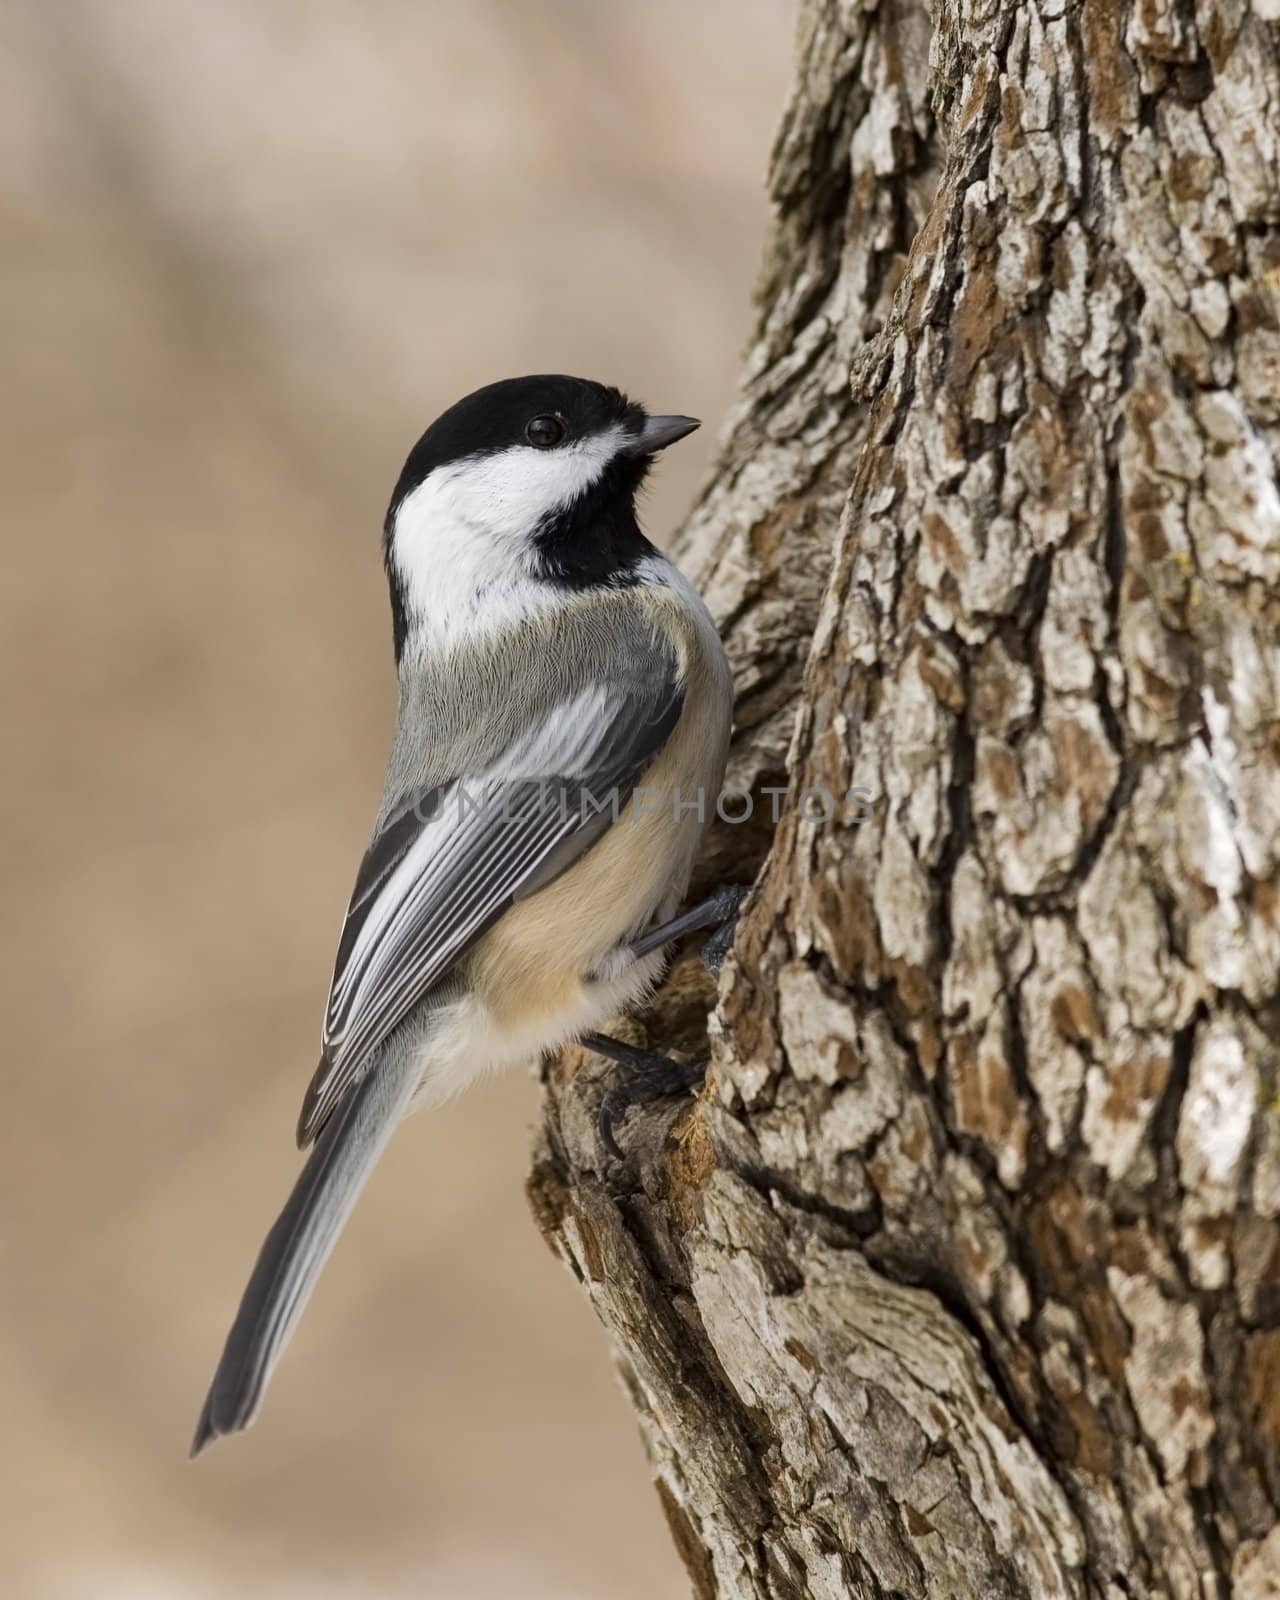 Black-capped chickadee perched on a tree trunk.